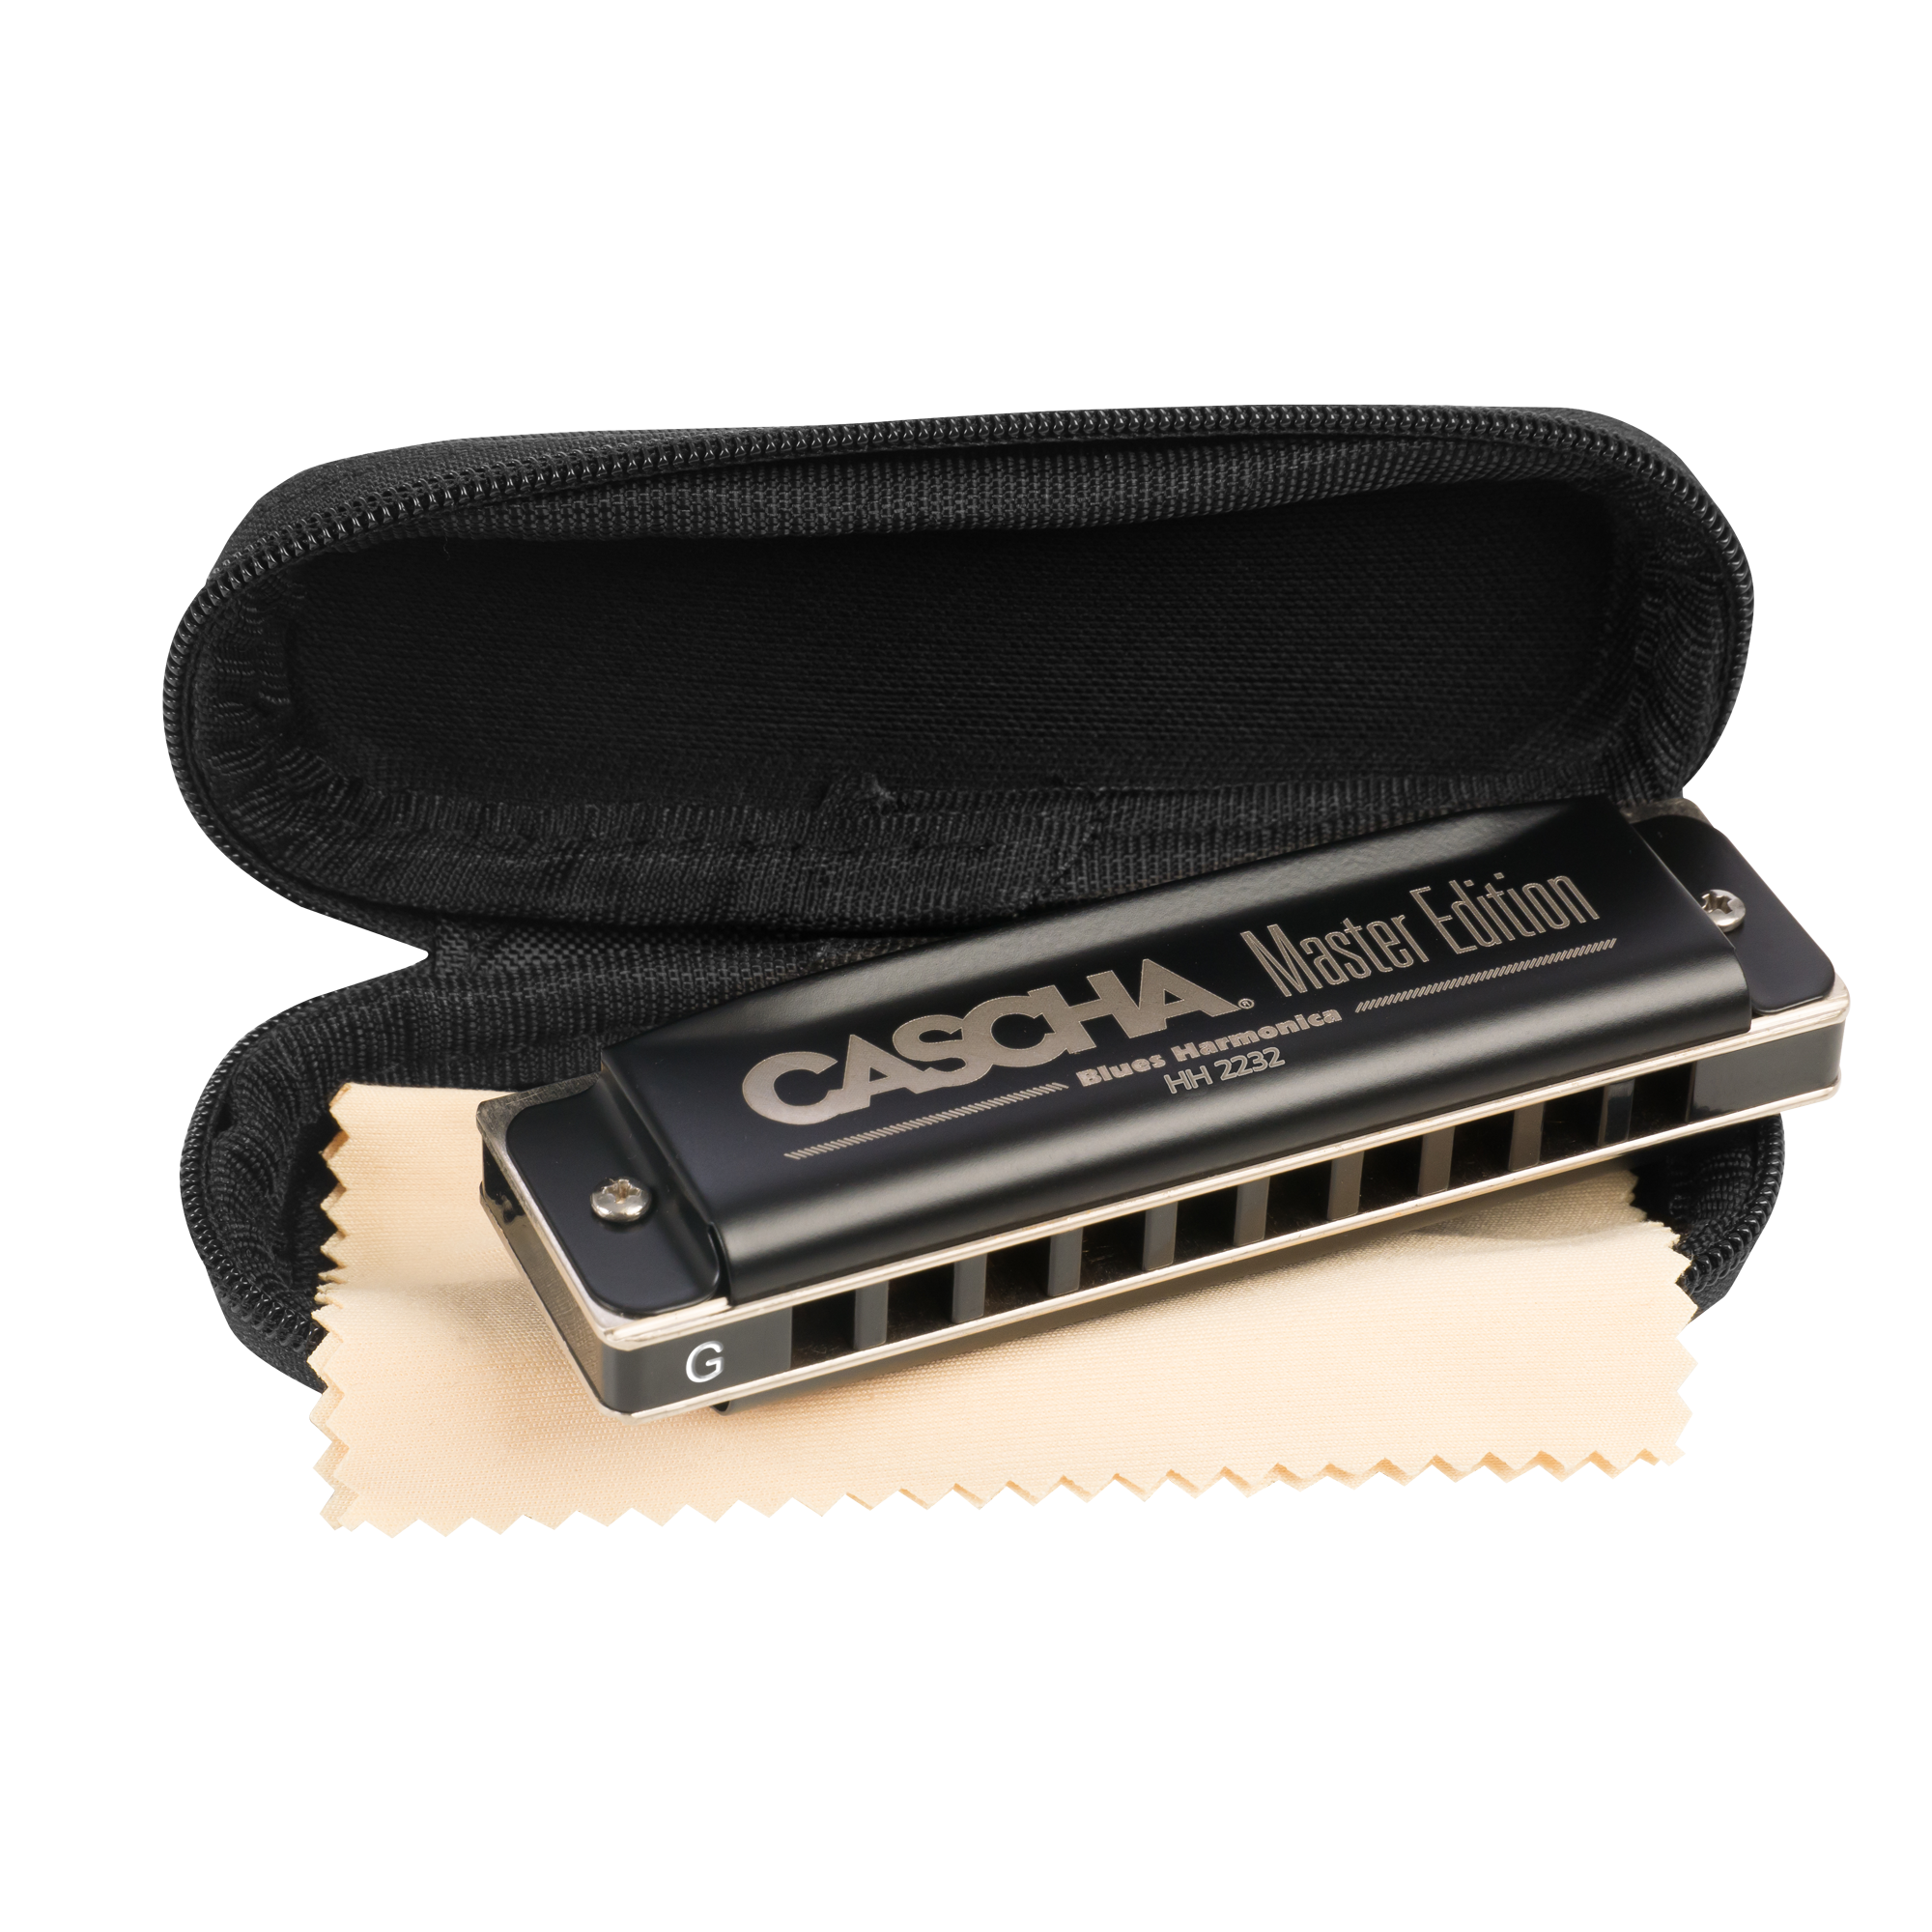 English beginners/' school CASCHA harmonica learning set including high-quality harmonica in C-Major diatonic ideal for beginners and adults case and care cloth